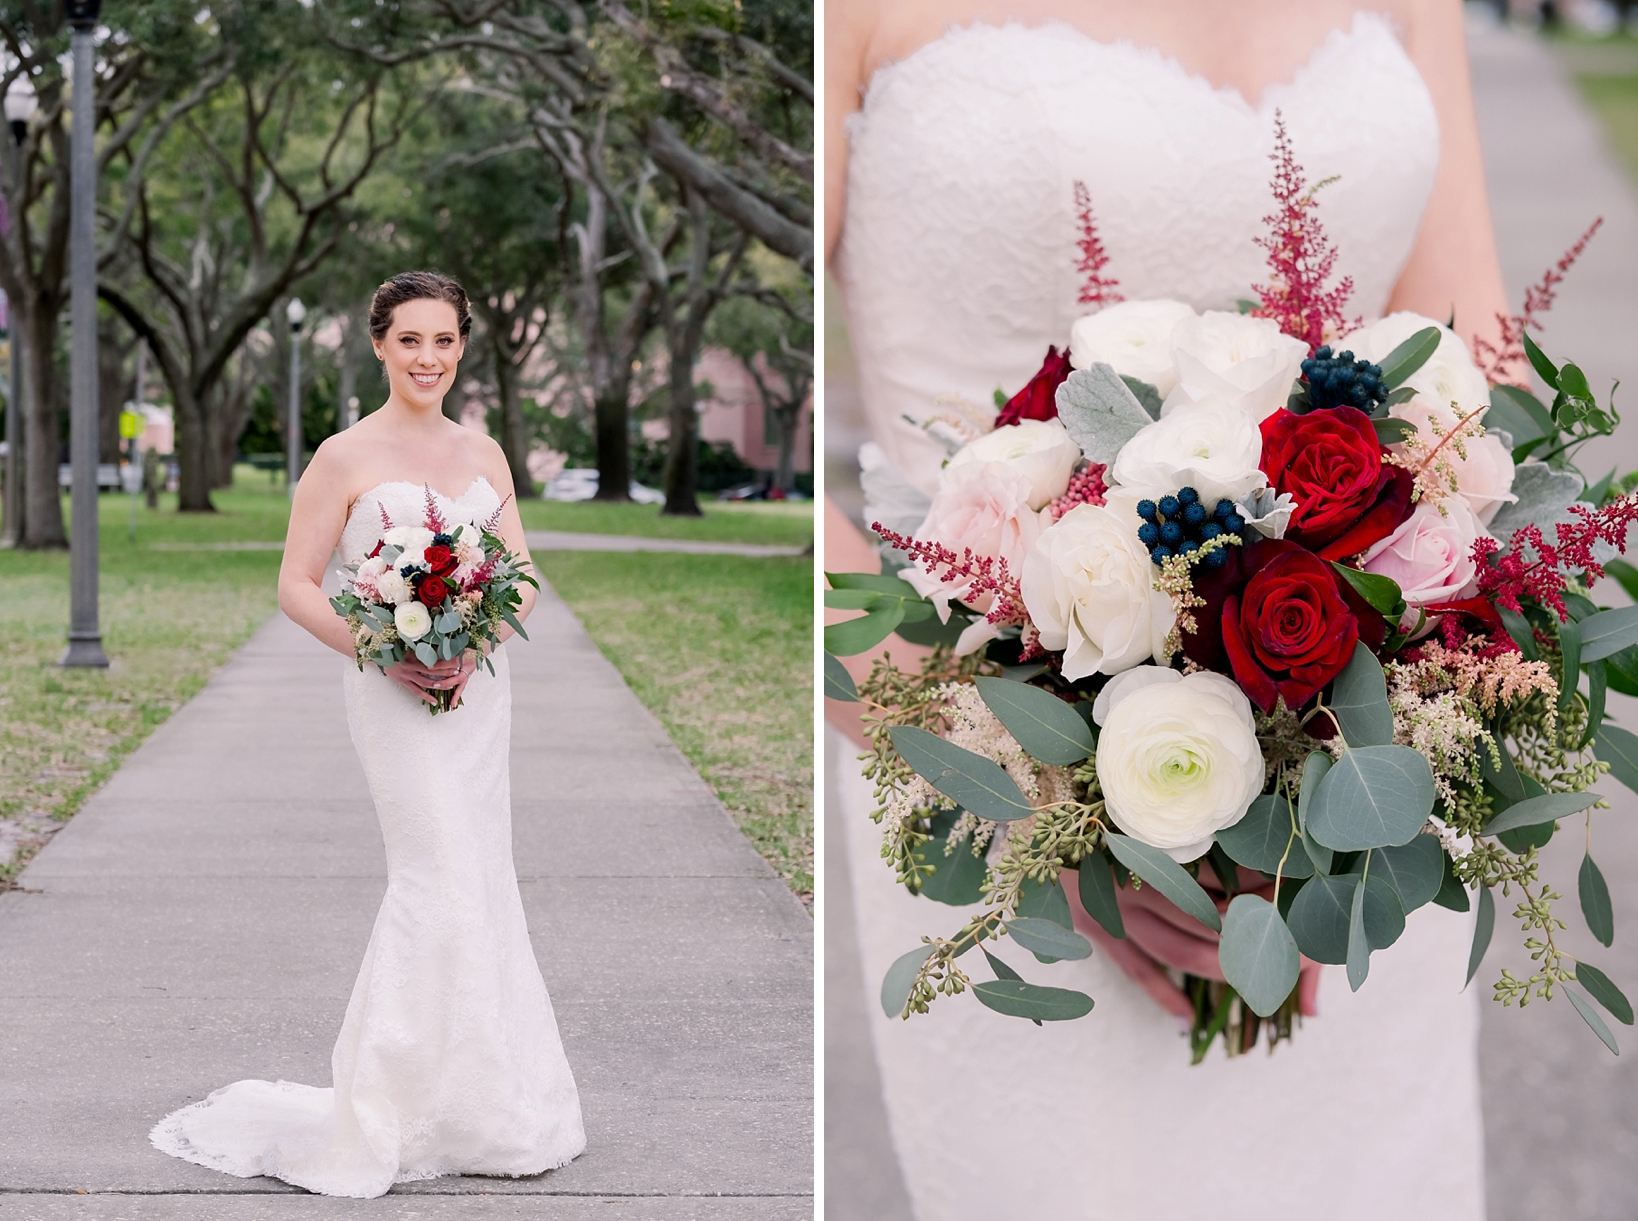 Solo portrait of the Bride and a detailed look at her flowers in the Bouquet